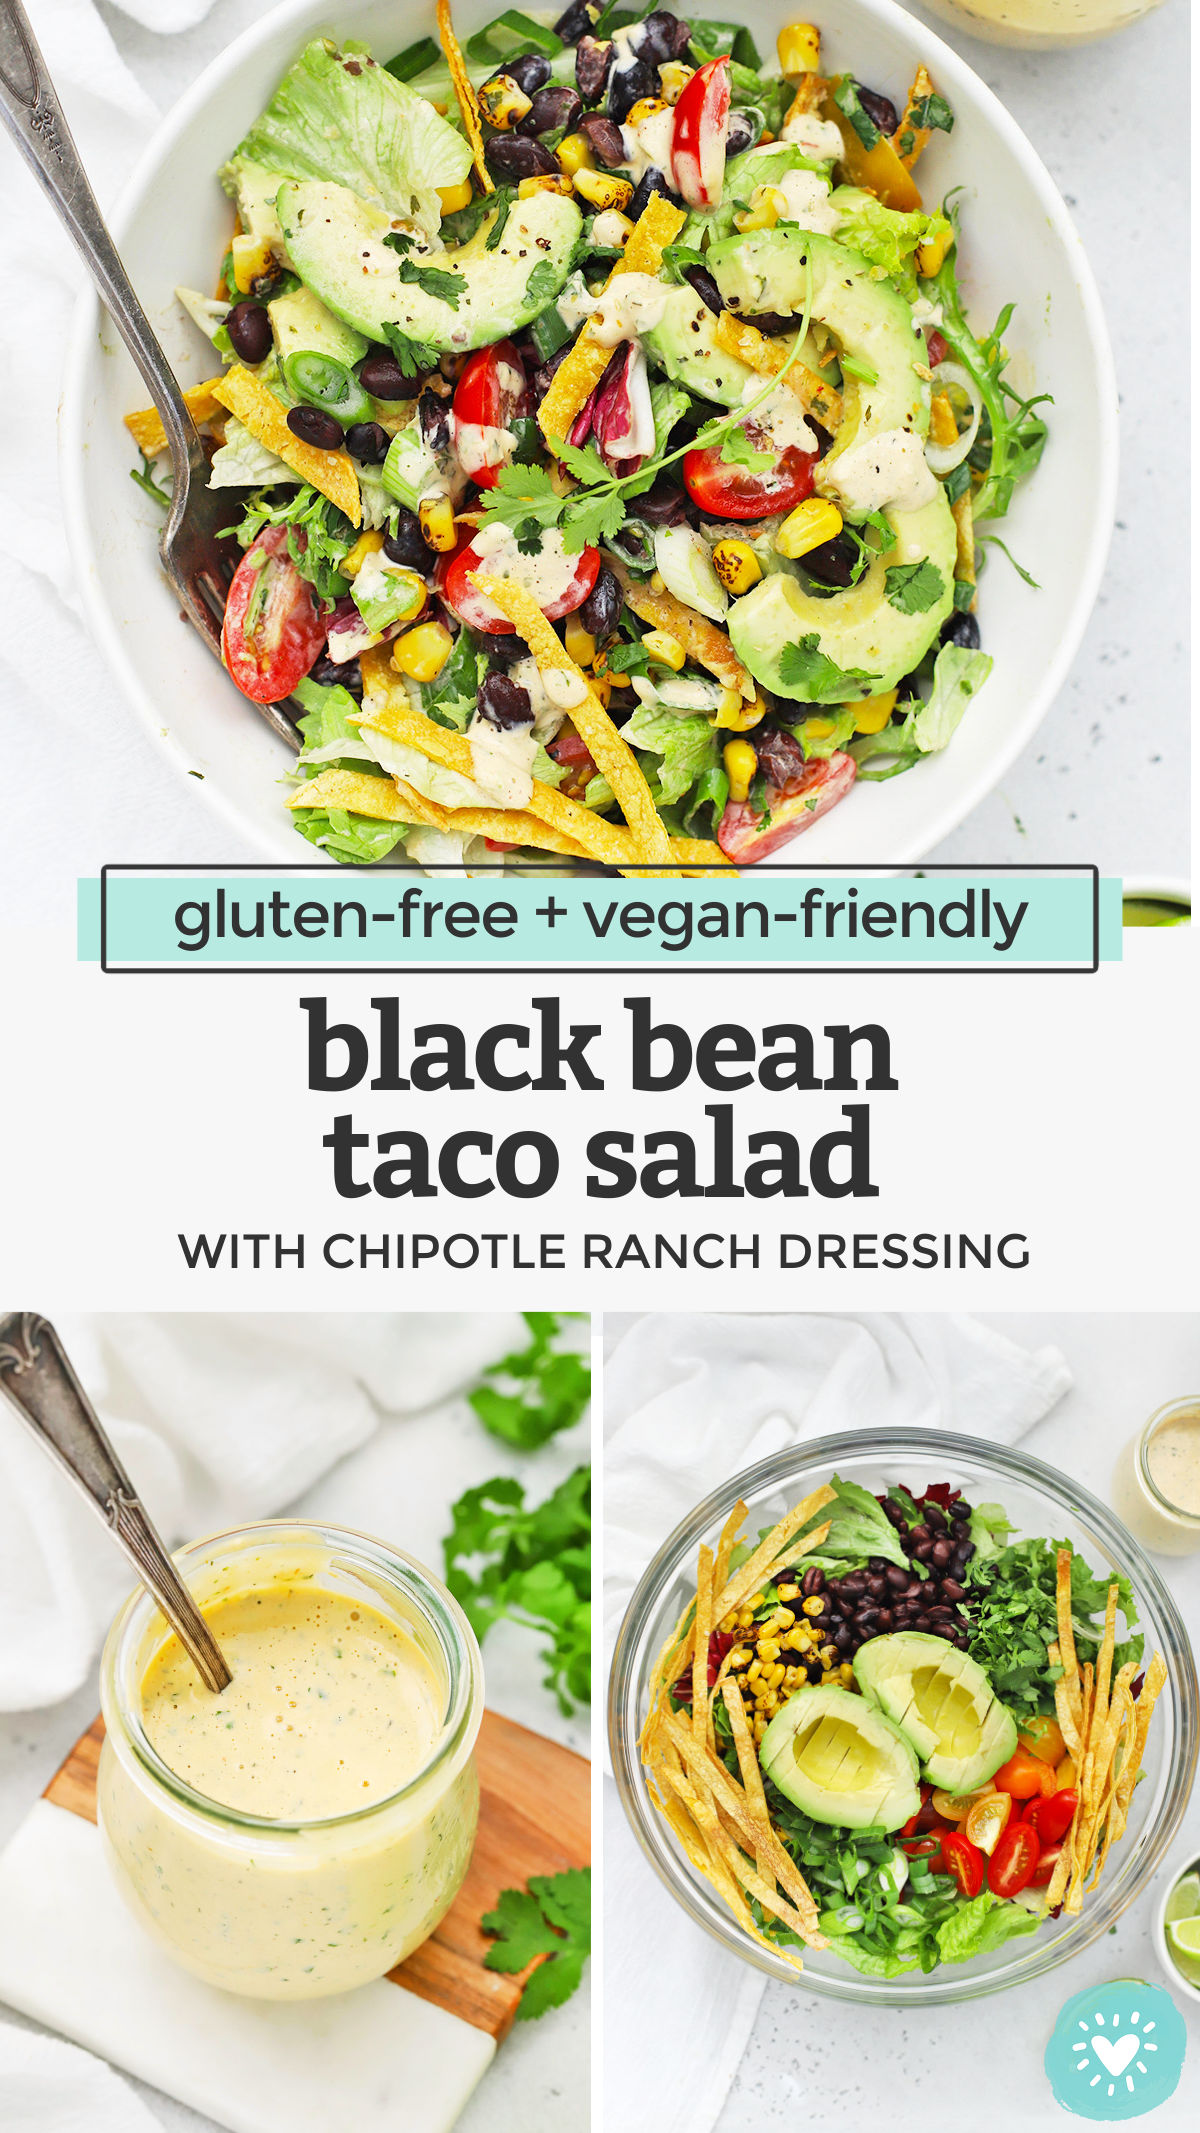 Black Bean Taco Salad - A gorgeous vegetarian taco salad with colorful veggies and a creamy dressing that'll keep you coming back for more! (Gluten-Free, Vegan-Friendly) // Vegan Taco Salad // Meatless Monday // Vegan Dinner // Healthy Dinner // Vegetarian Dinner